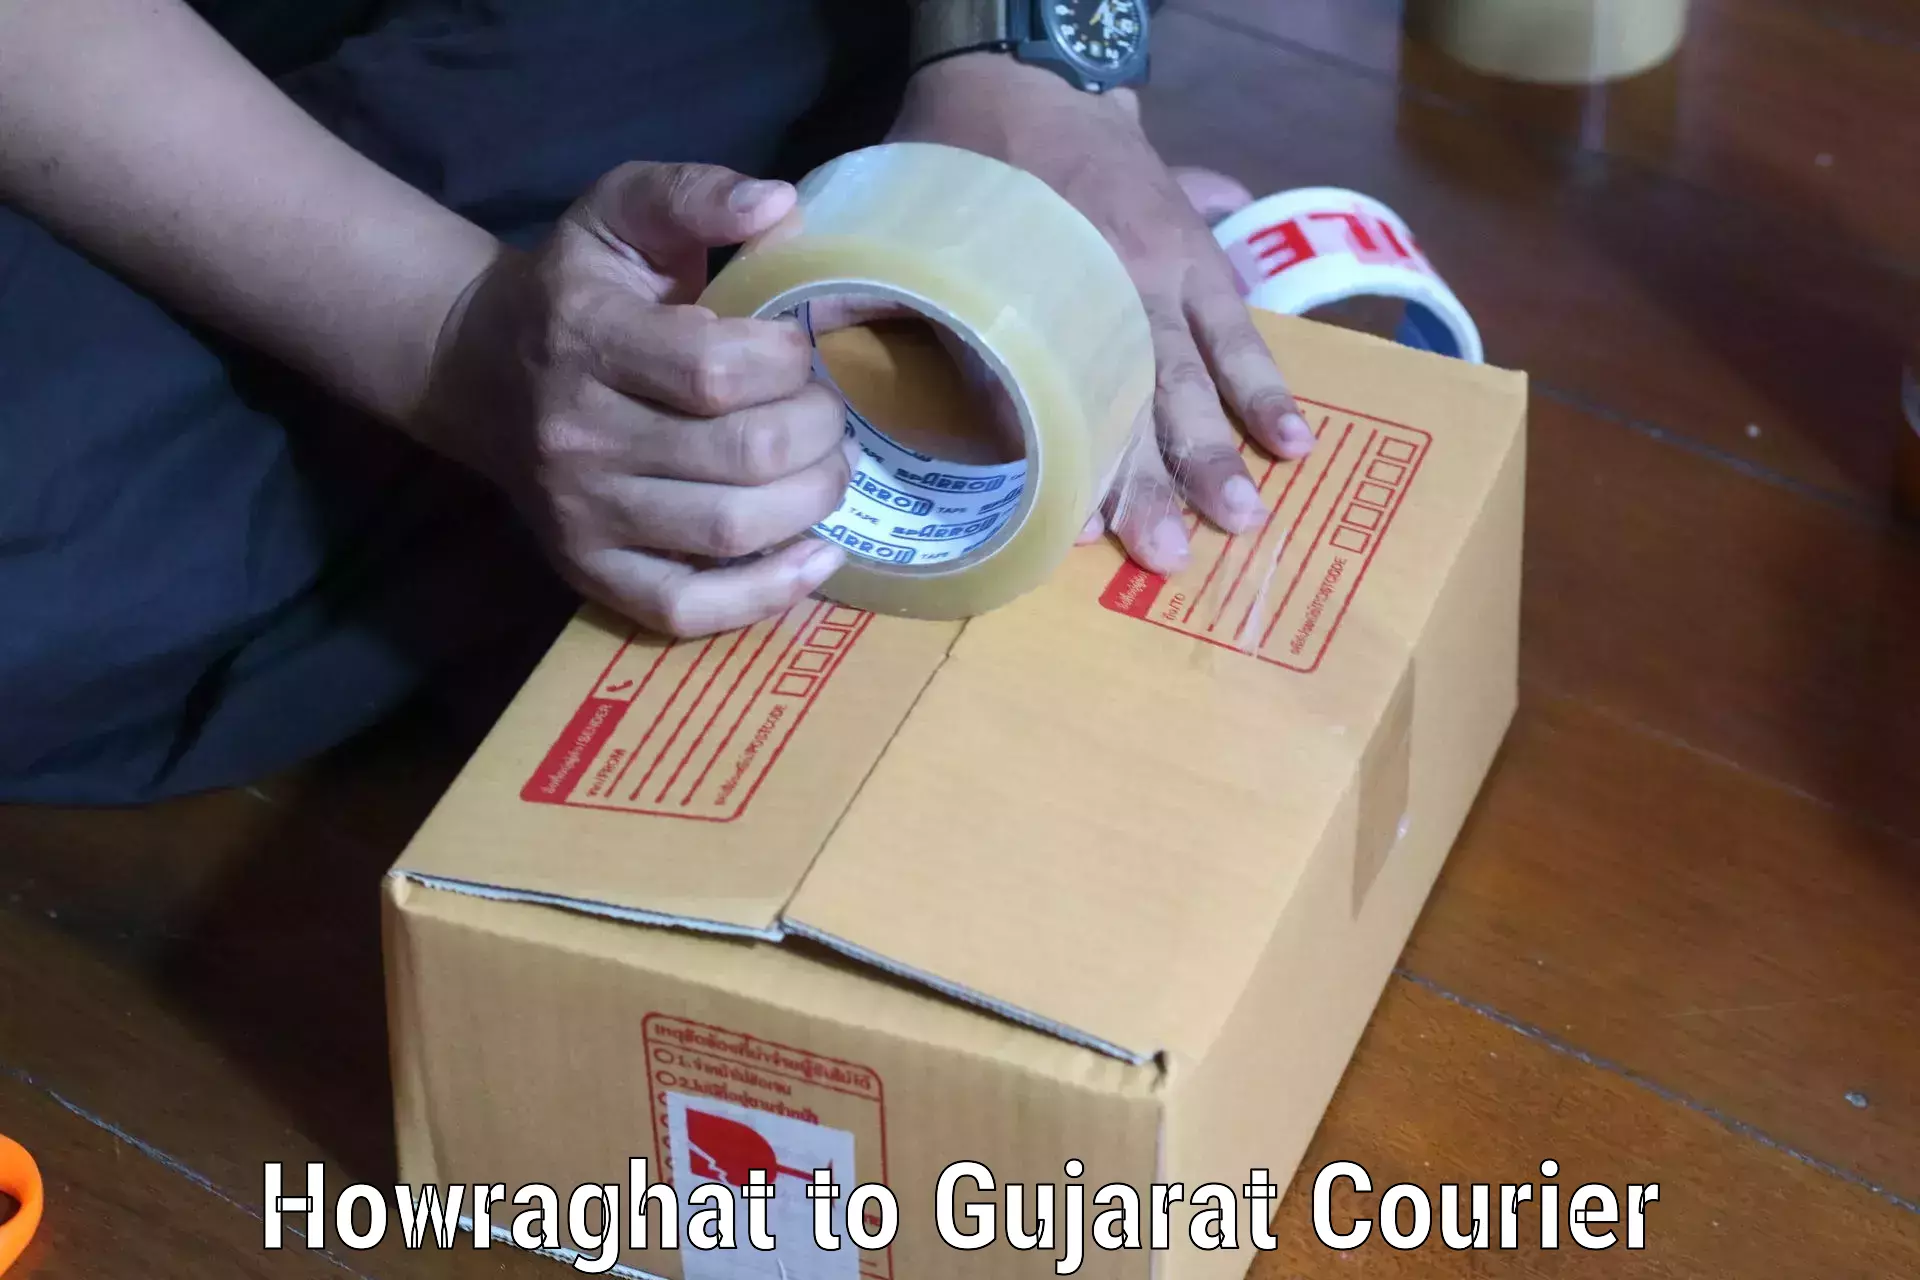 Round-the-clock parcel delivery Howraghat to Veraval